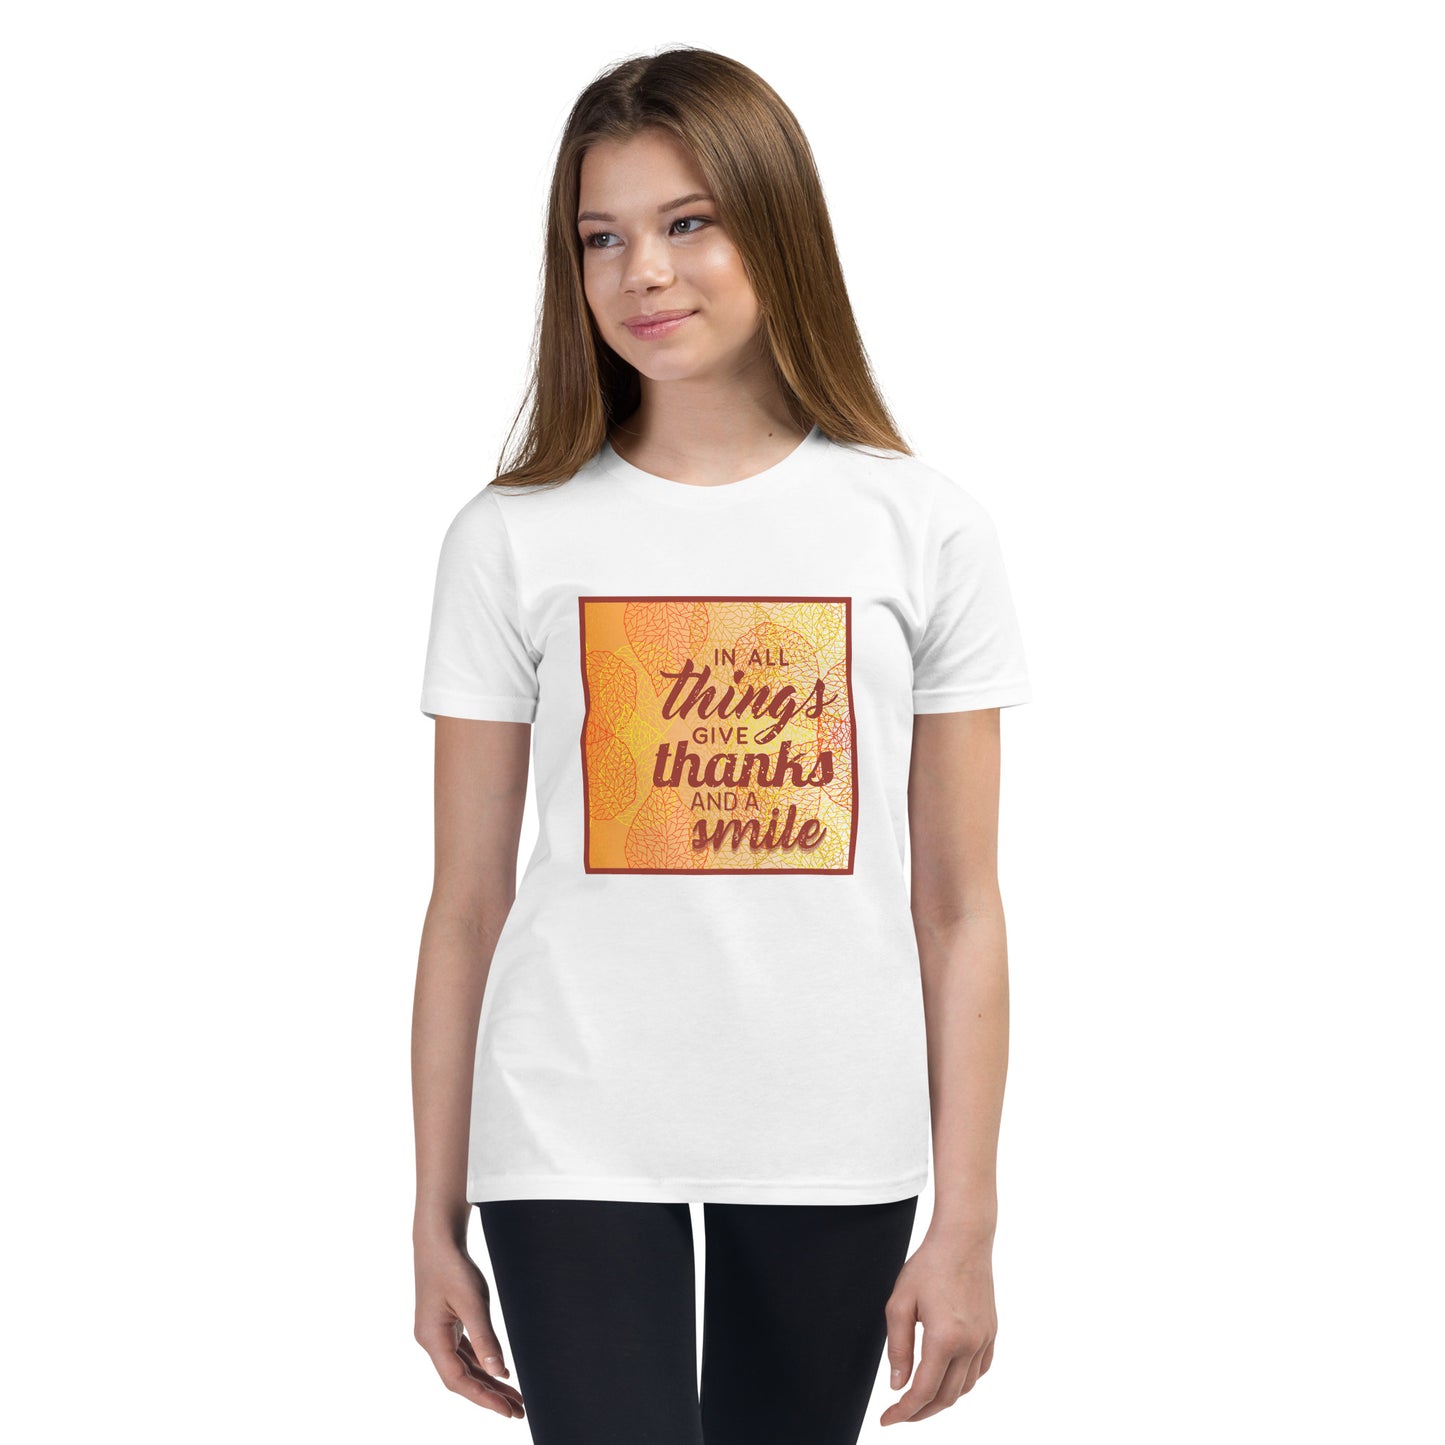 In all thank give thanks and a smile Youth Tee Shirt